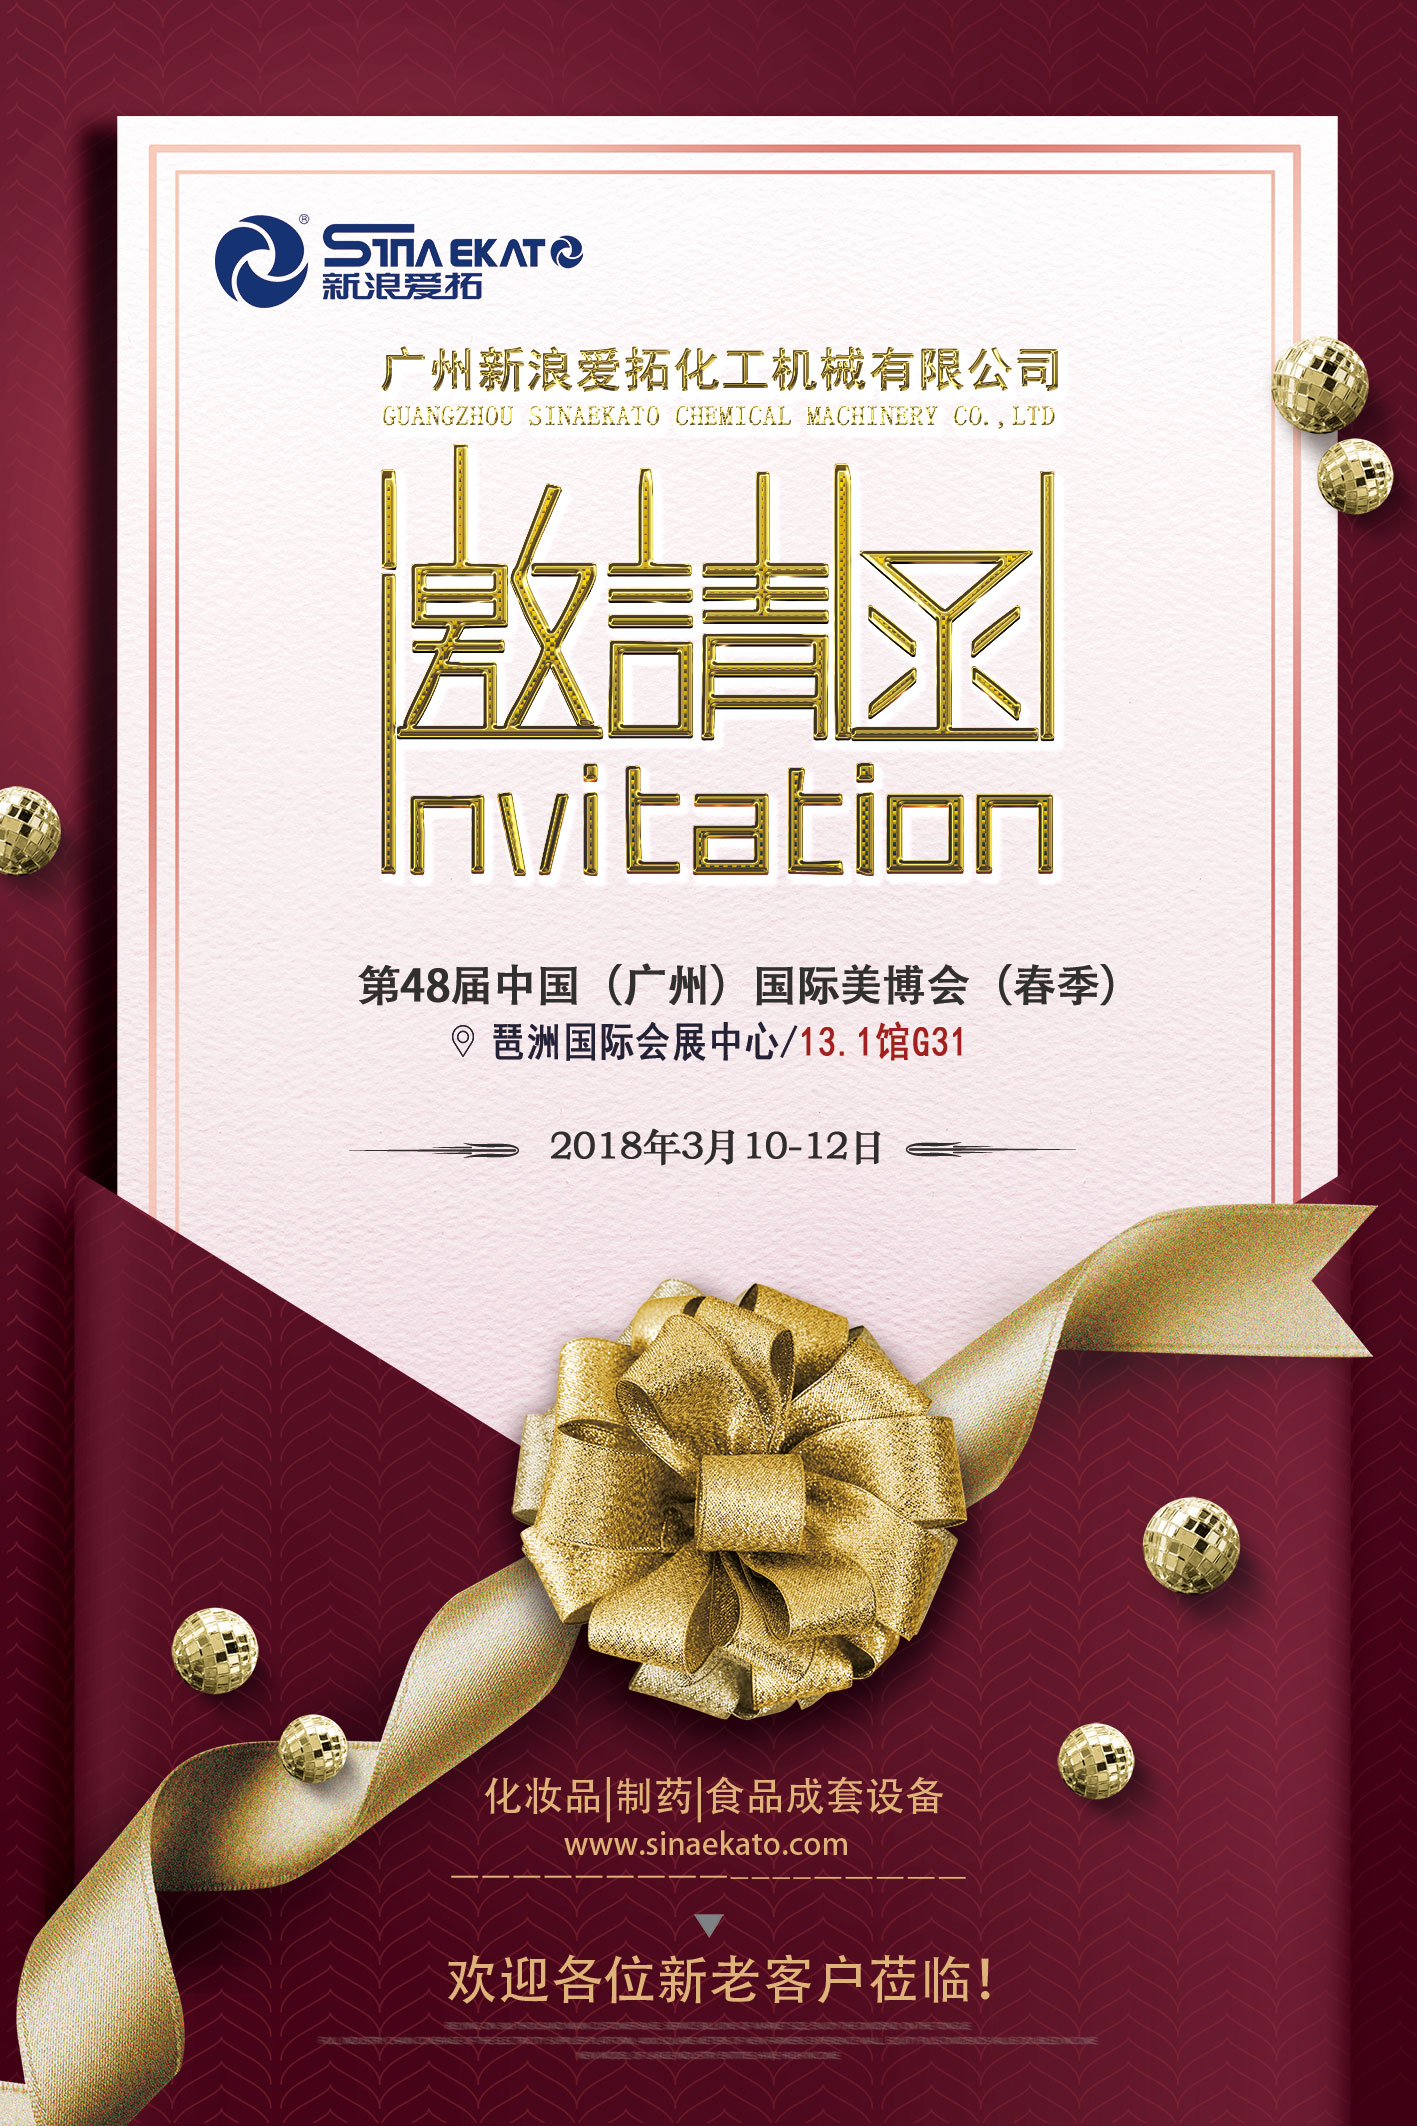 【SINAEKATO】The Invitation Letter of the 48th Guangzhou Spring Fair,2018